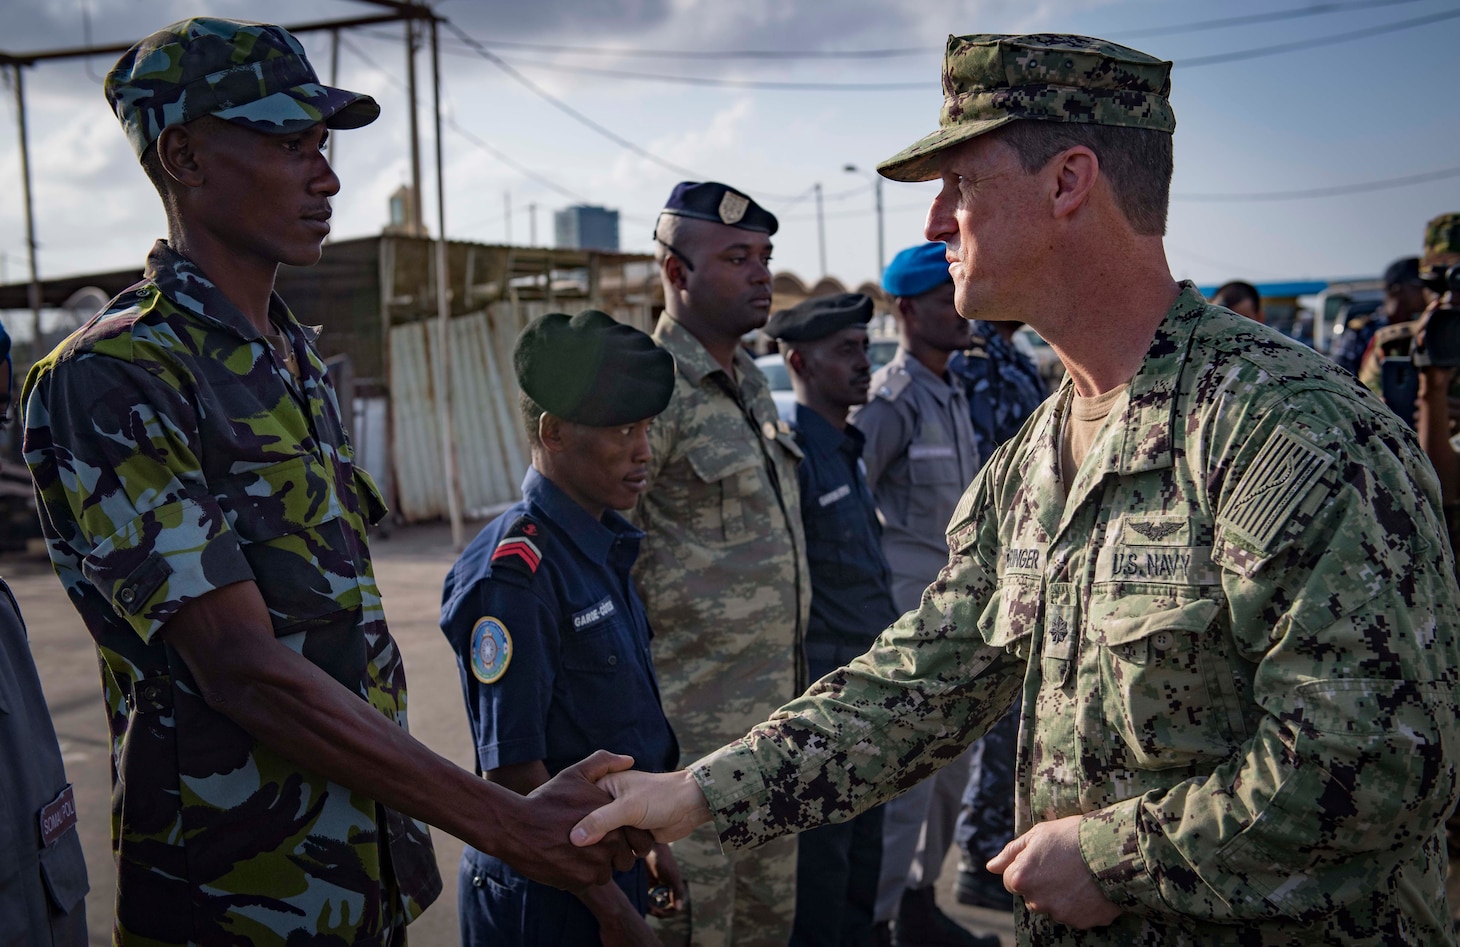 Sailors from the U.S., Indian, Comorian, Kenyan, Djiboutian and Somali navies along with U.S. Coast Guard sailors and Royal Netherlands Marines gather for the closing ceremony of exercise Cutlass Express 2019 in Djibouti, Feb. 6, 2019.